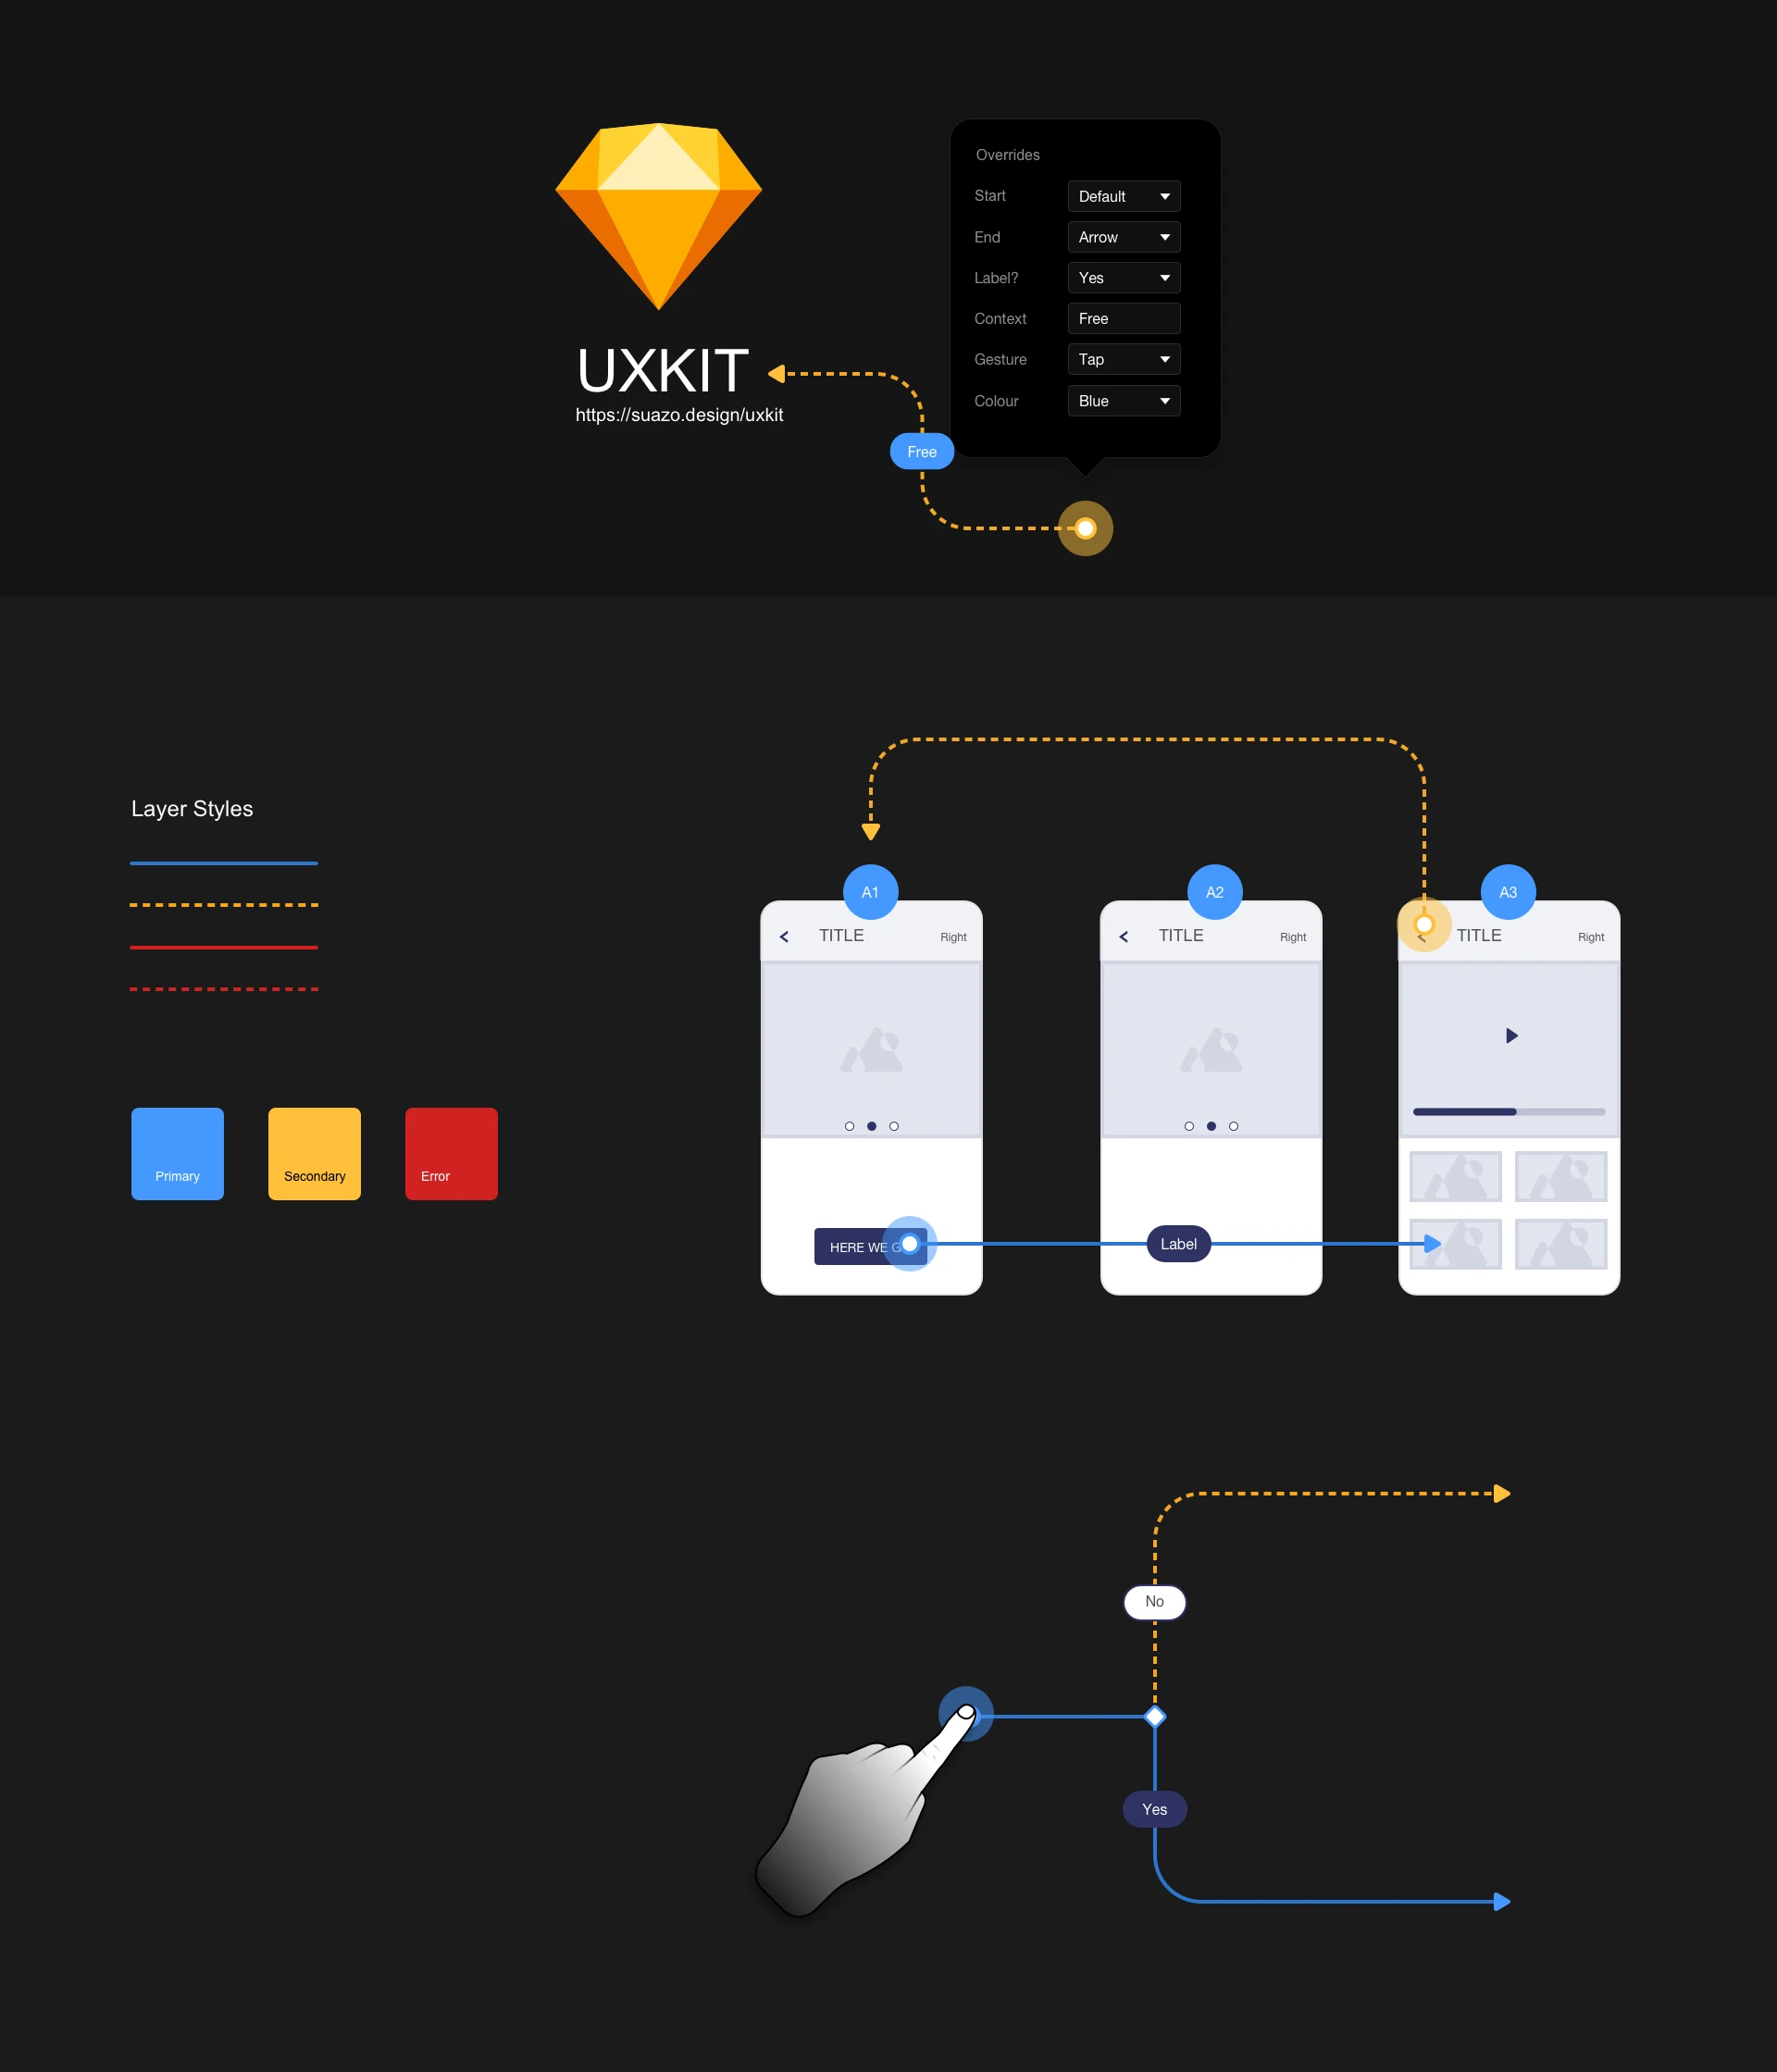 UXKIT - Flowkit for Sketch - Having to Draw, lines, arrows and boxes for every design task become tiresome, so I decided to make time and utilise some of Sketch handy features - libraries, symbols, and overrides.